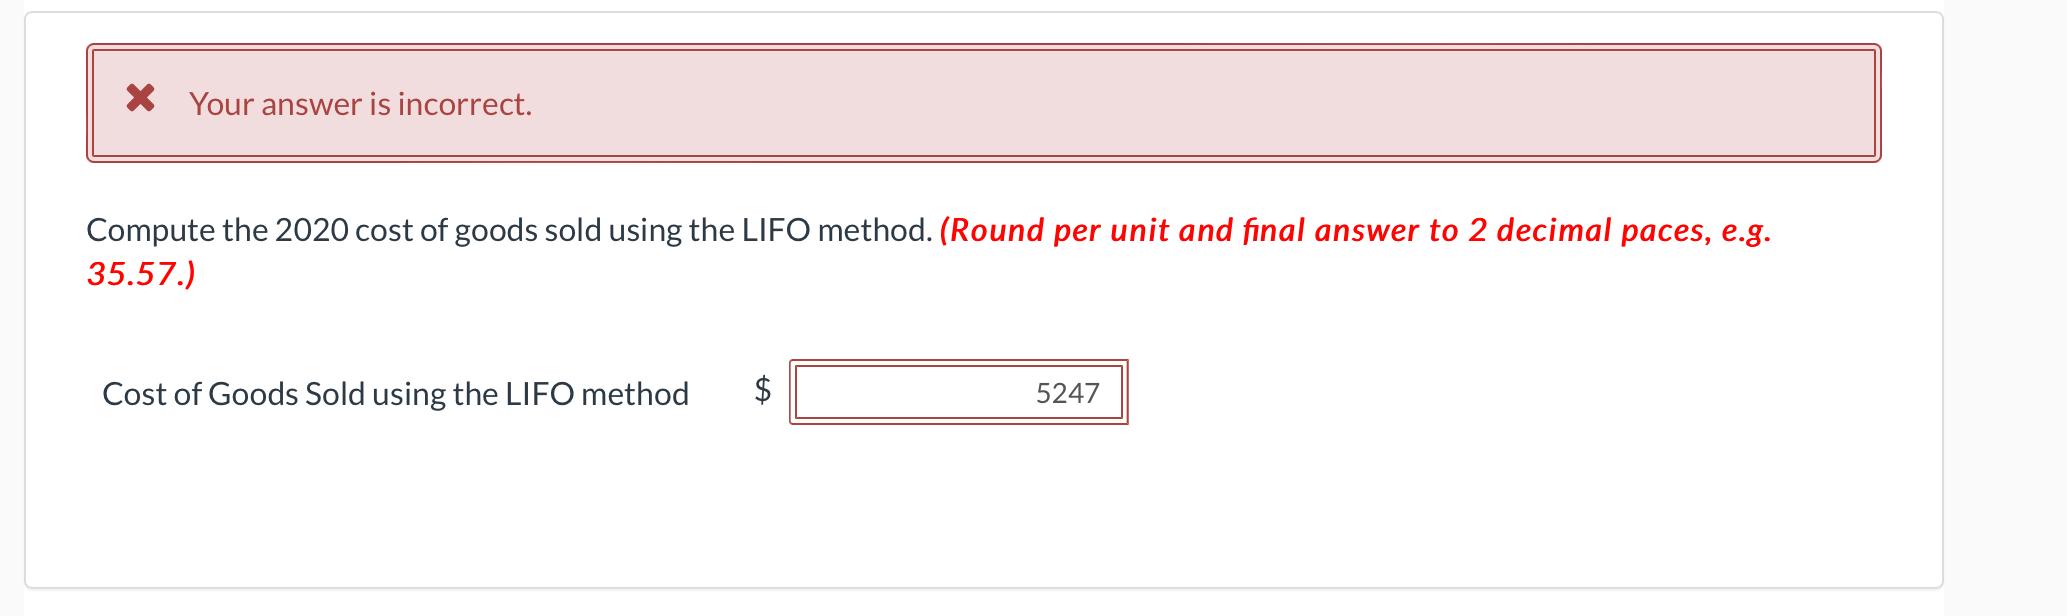 * Your answer is incorrect.Compute the 2020 cost of goods sold using the LIFO method. (Round per unit and final answer to 2